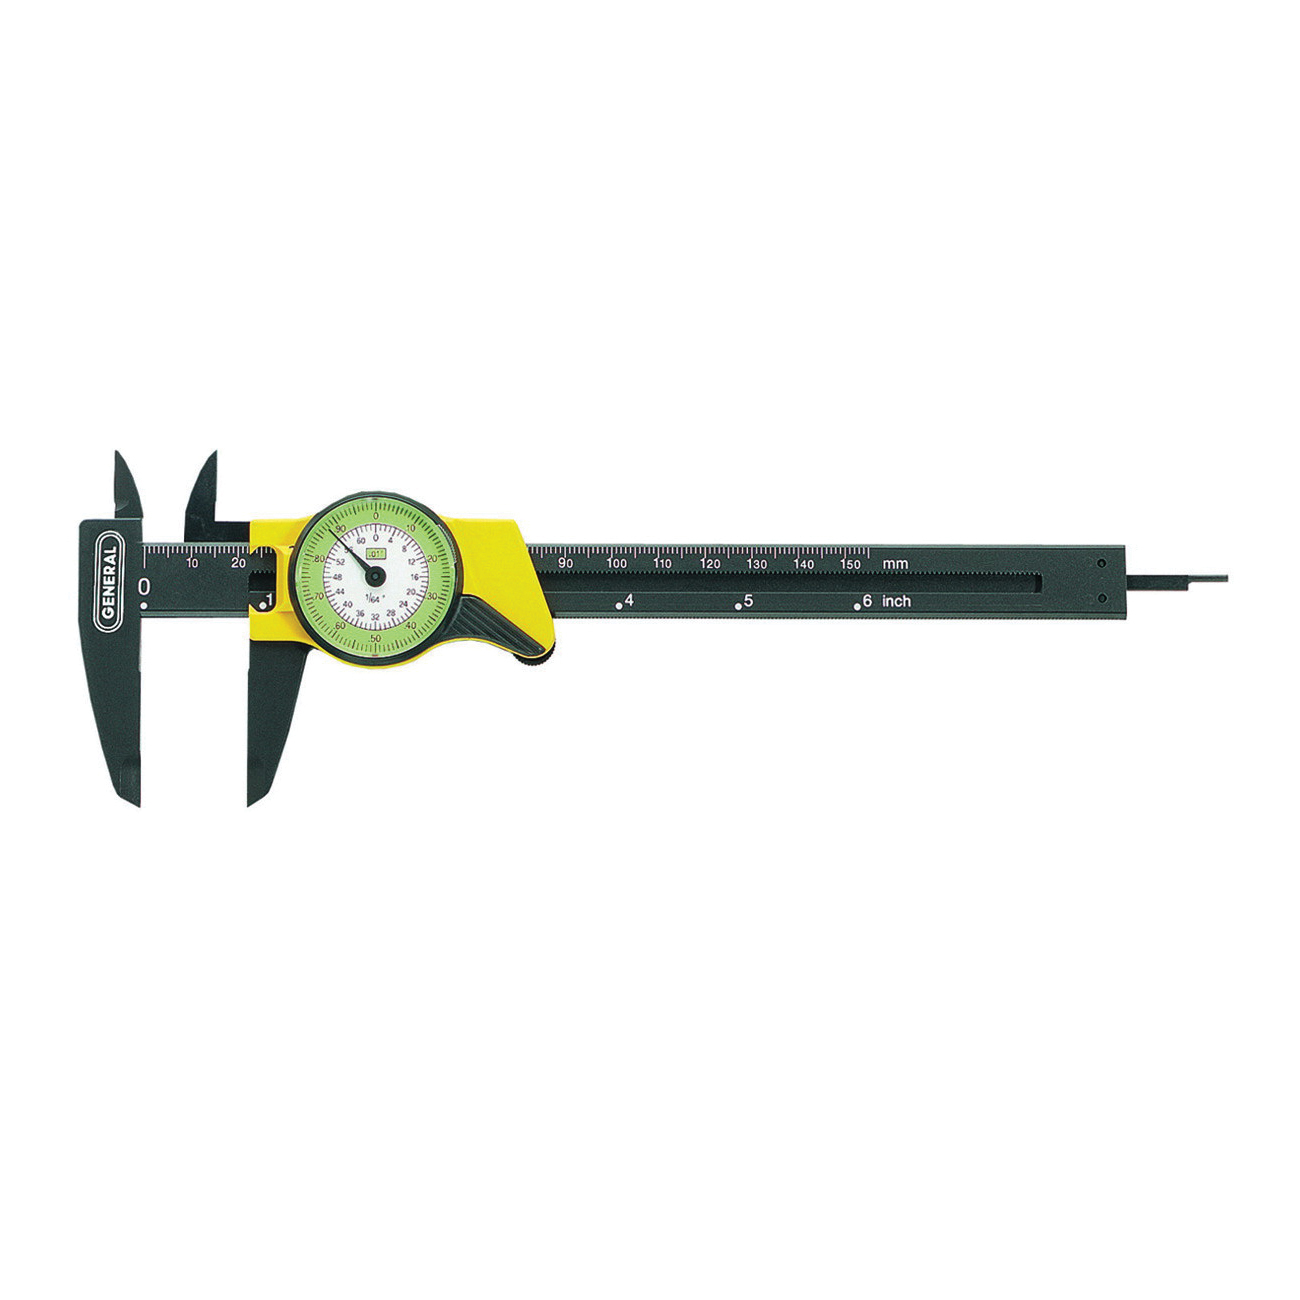 GENERAL® 14 Drill Gage, 1/16 to 1/2 in Measuring, Graduations 64ths, 6-1/2 in L x 2-1/2 in W